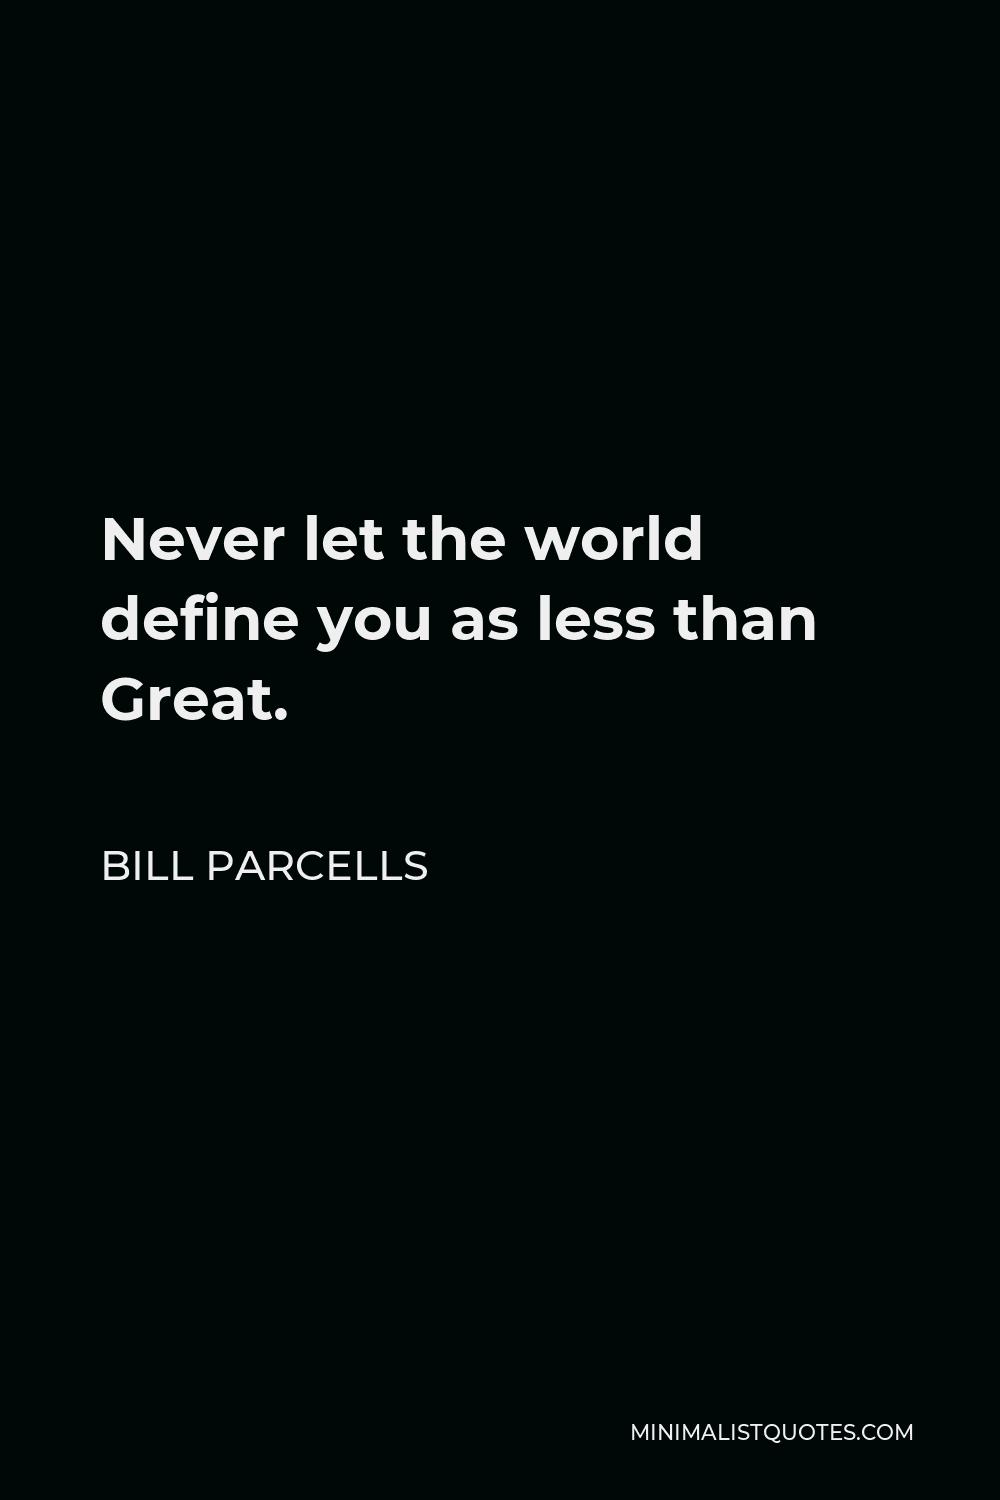 Bill Parcells Quote - Never let the world define you as less than Great.